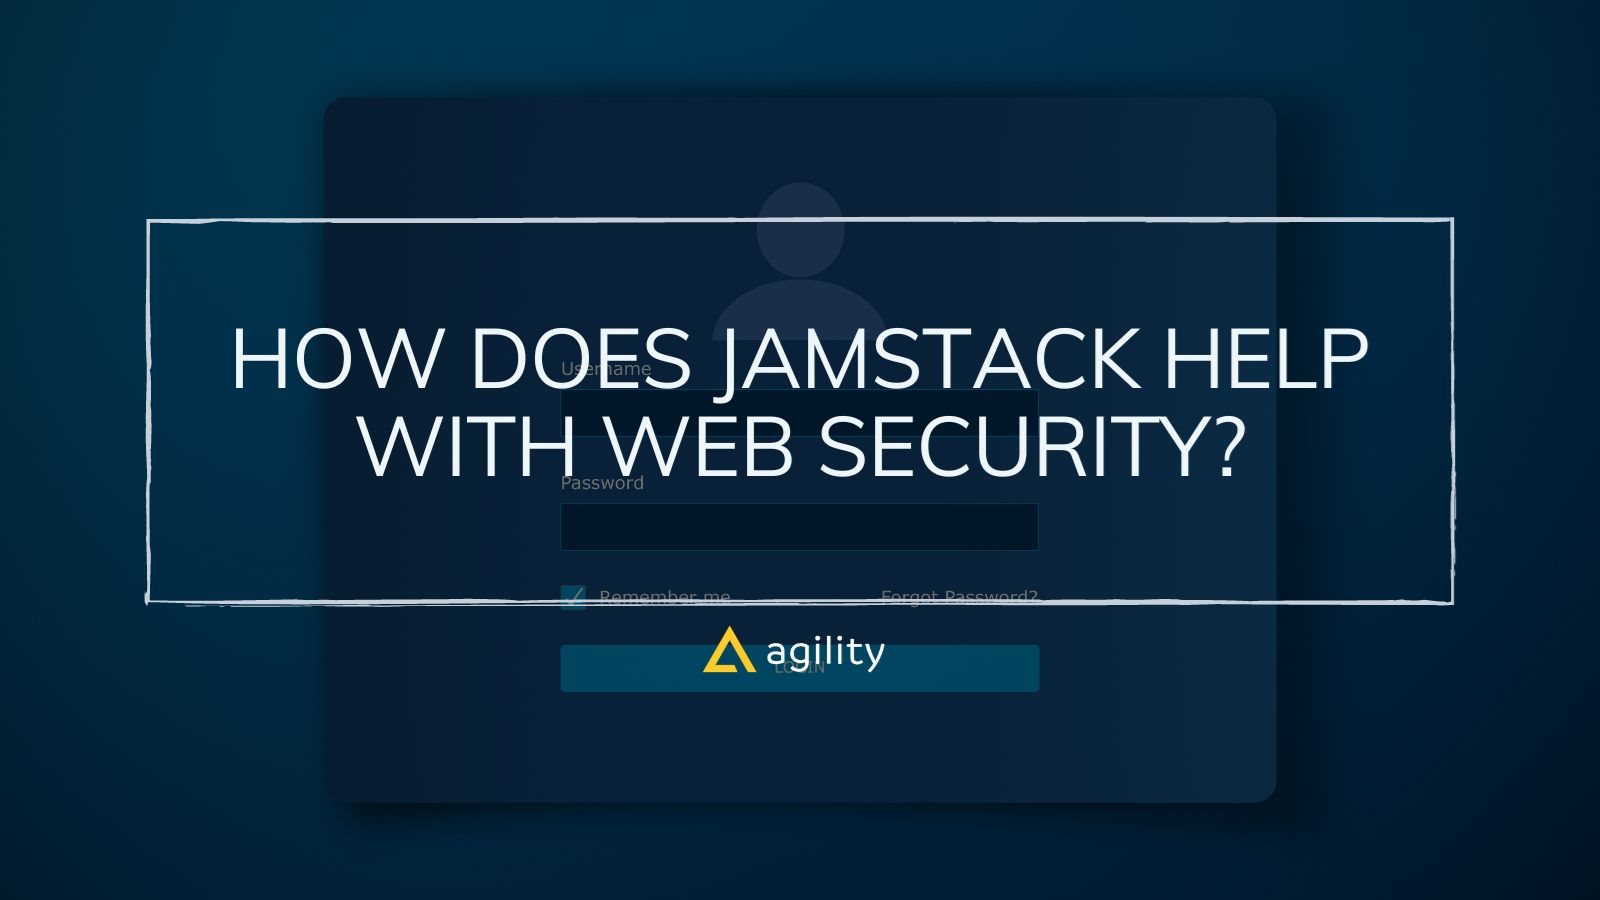 How does Jamstack help with Web Security?